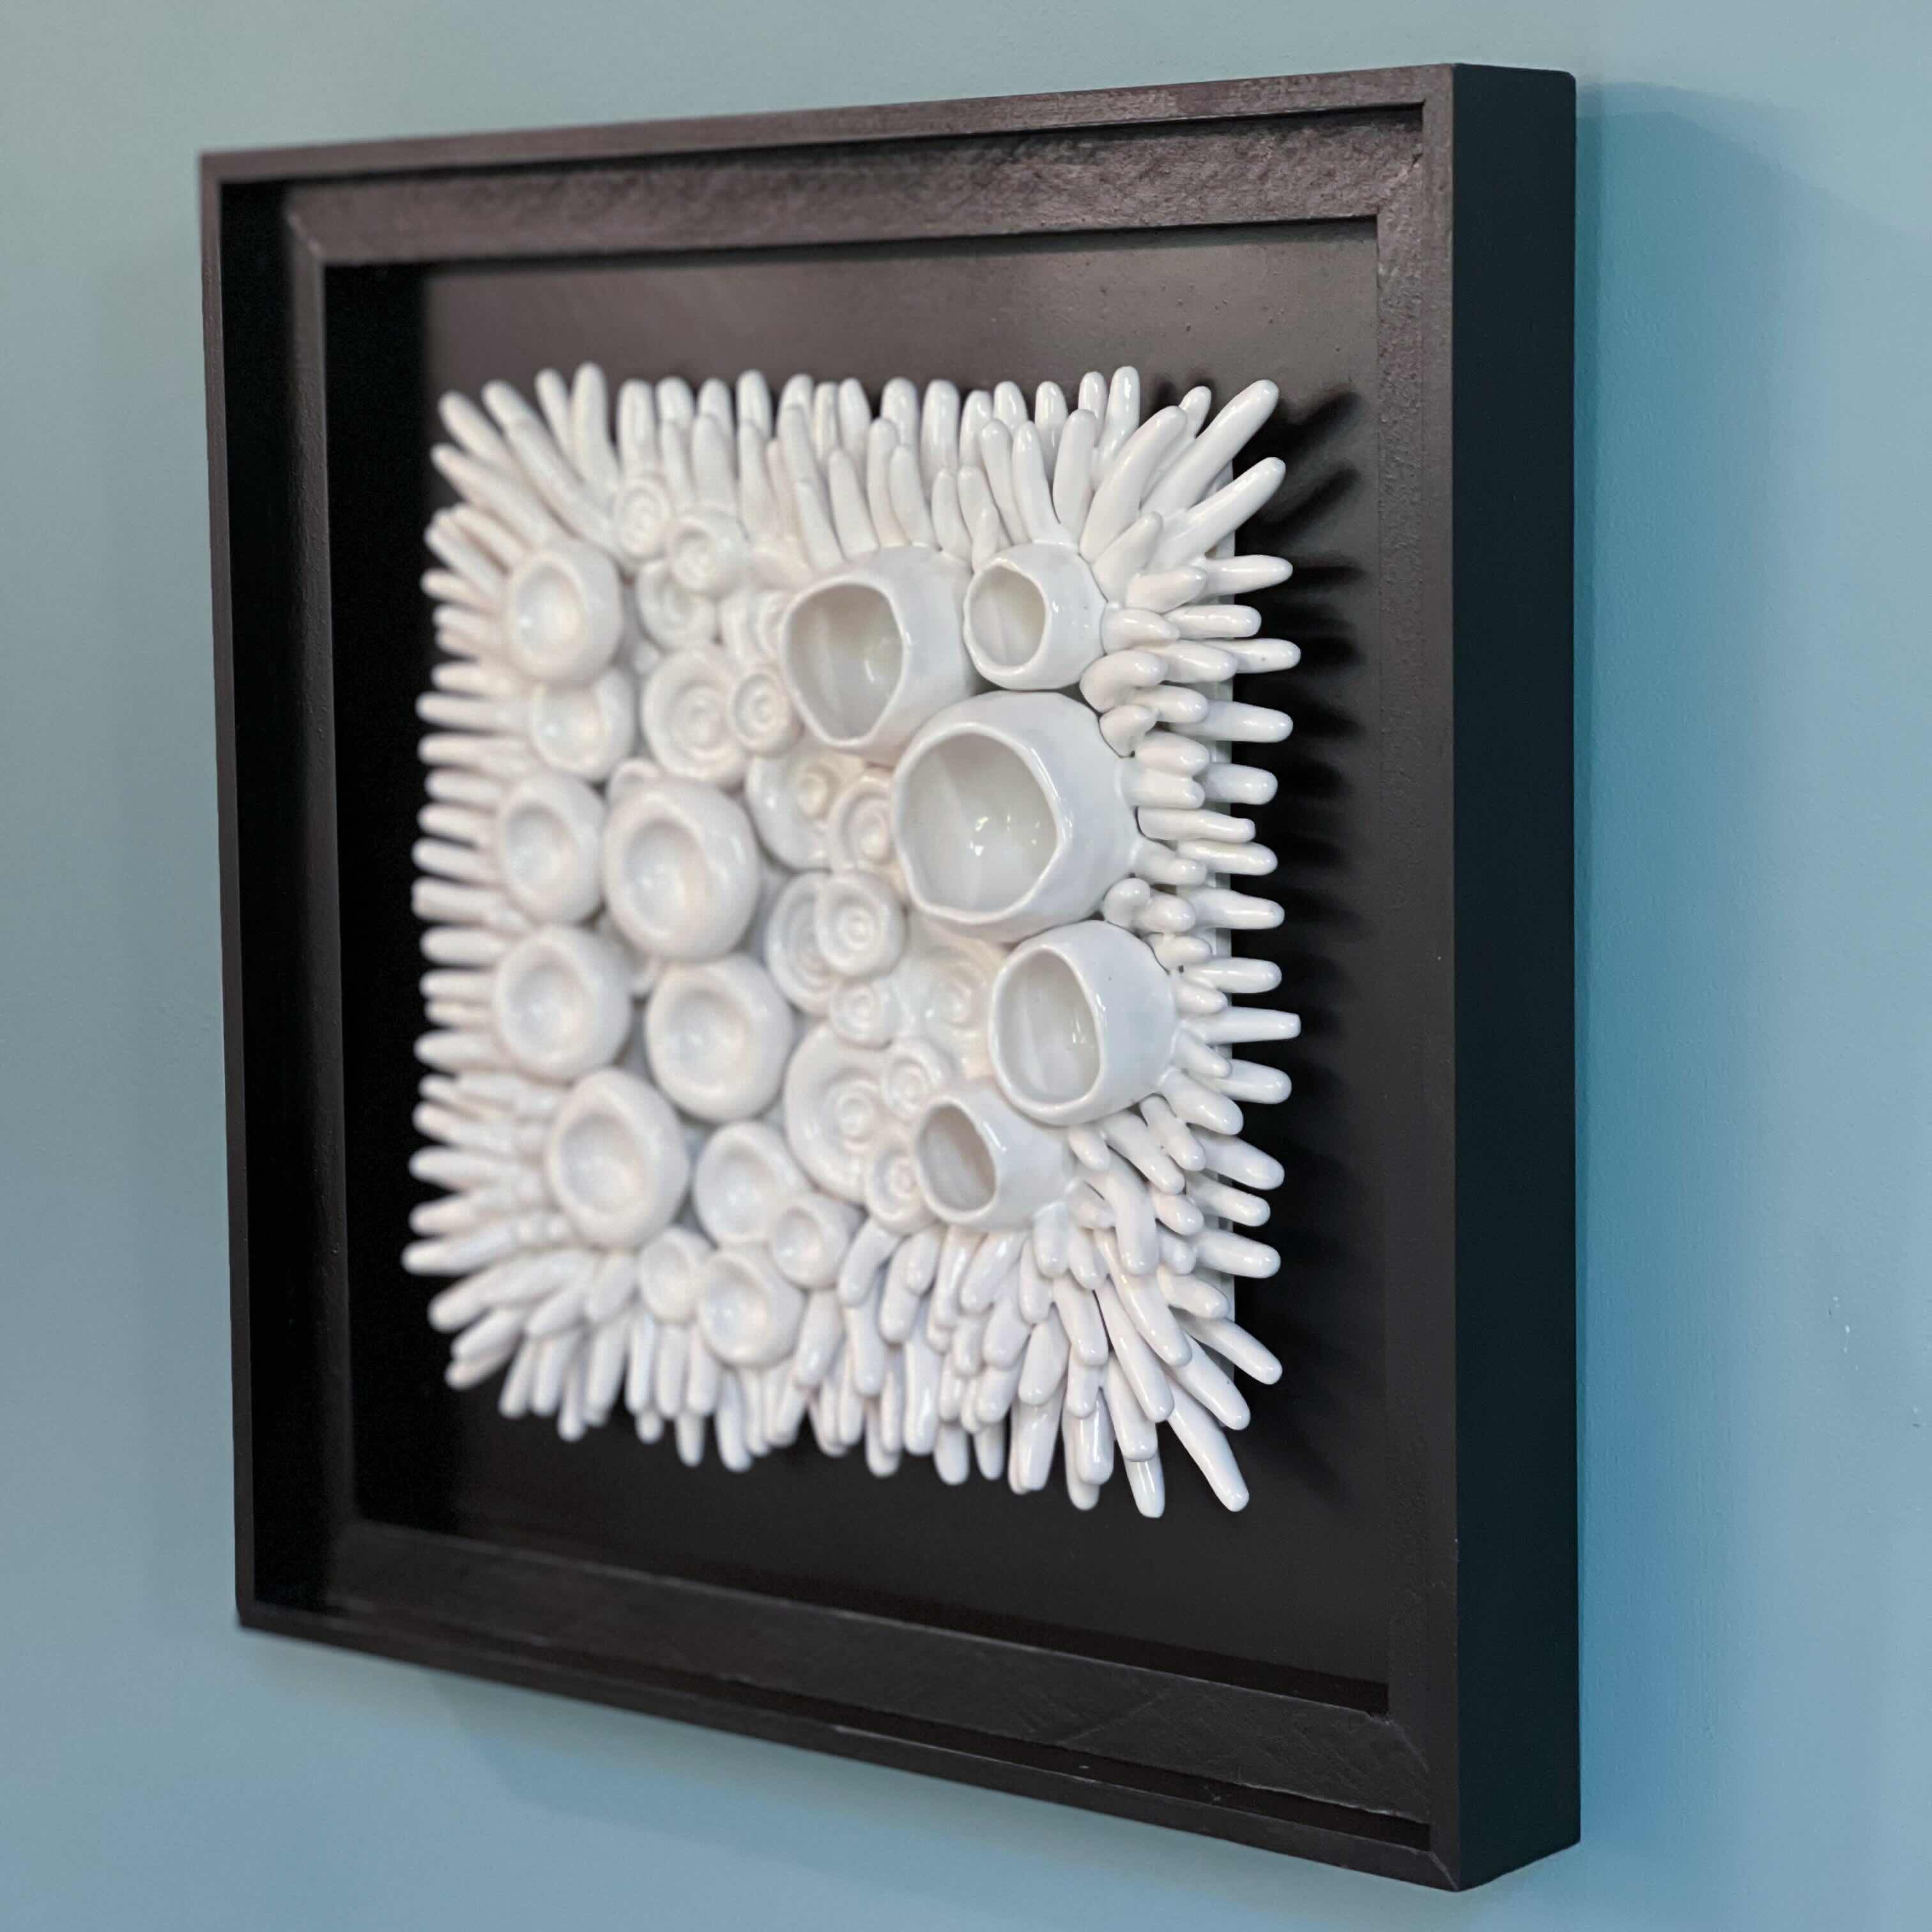 How To Mount Ceramic Wall Art